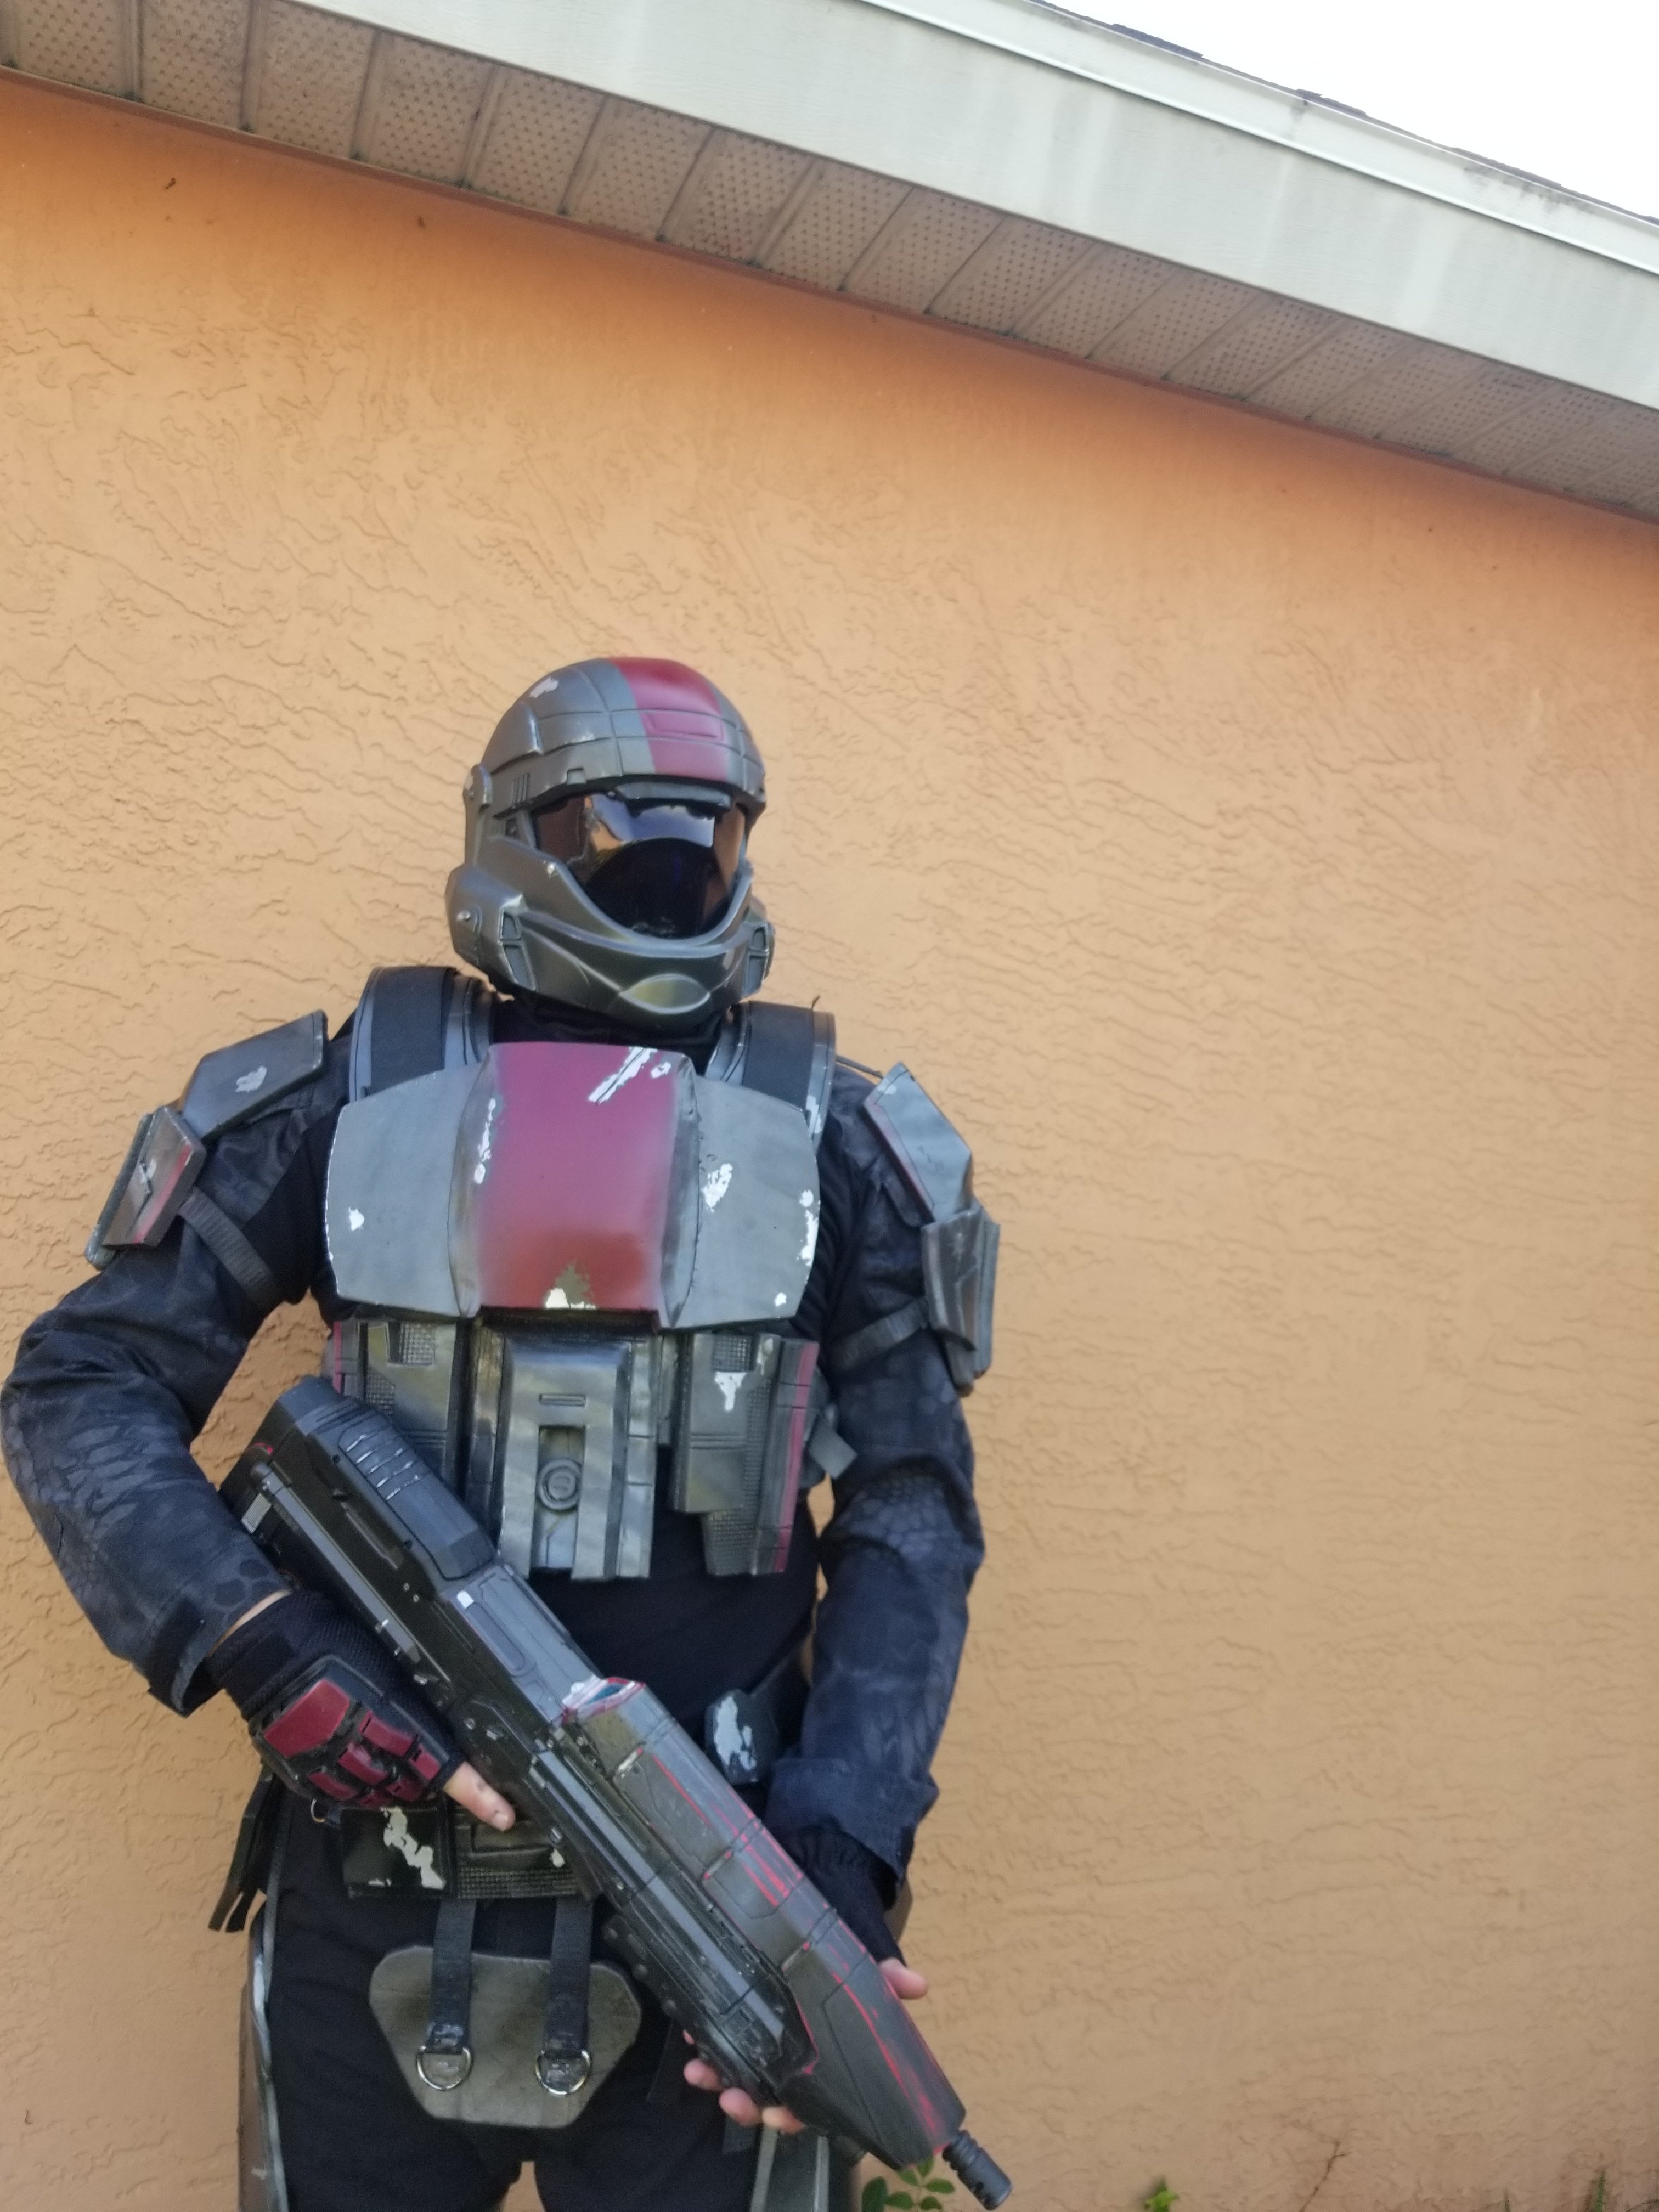 Eva foam odst builds | Halo Costume and Prop Maker Community - 405th